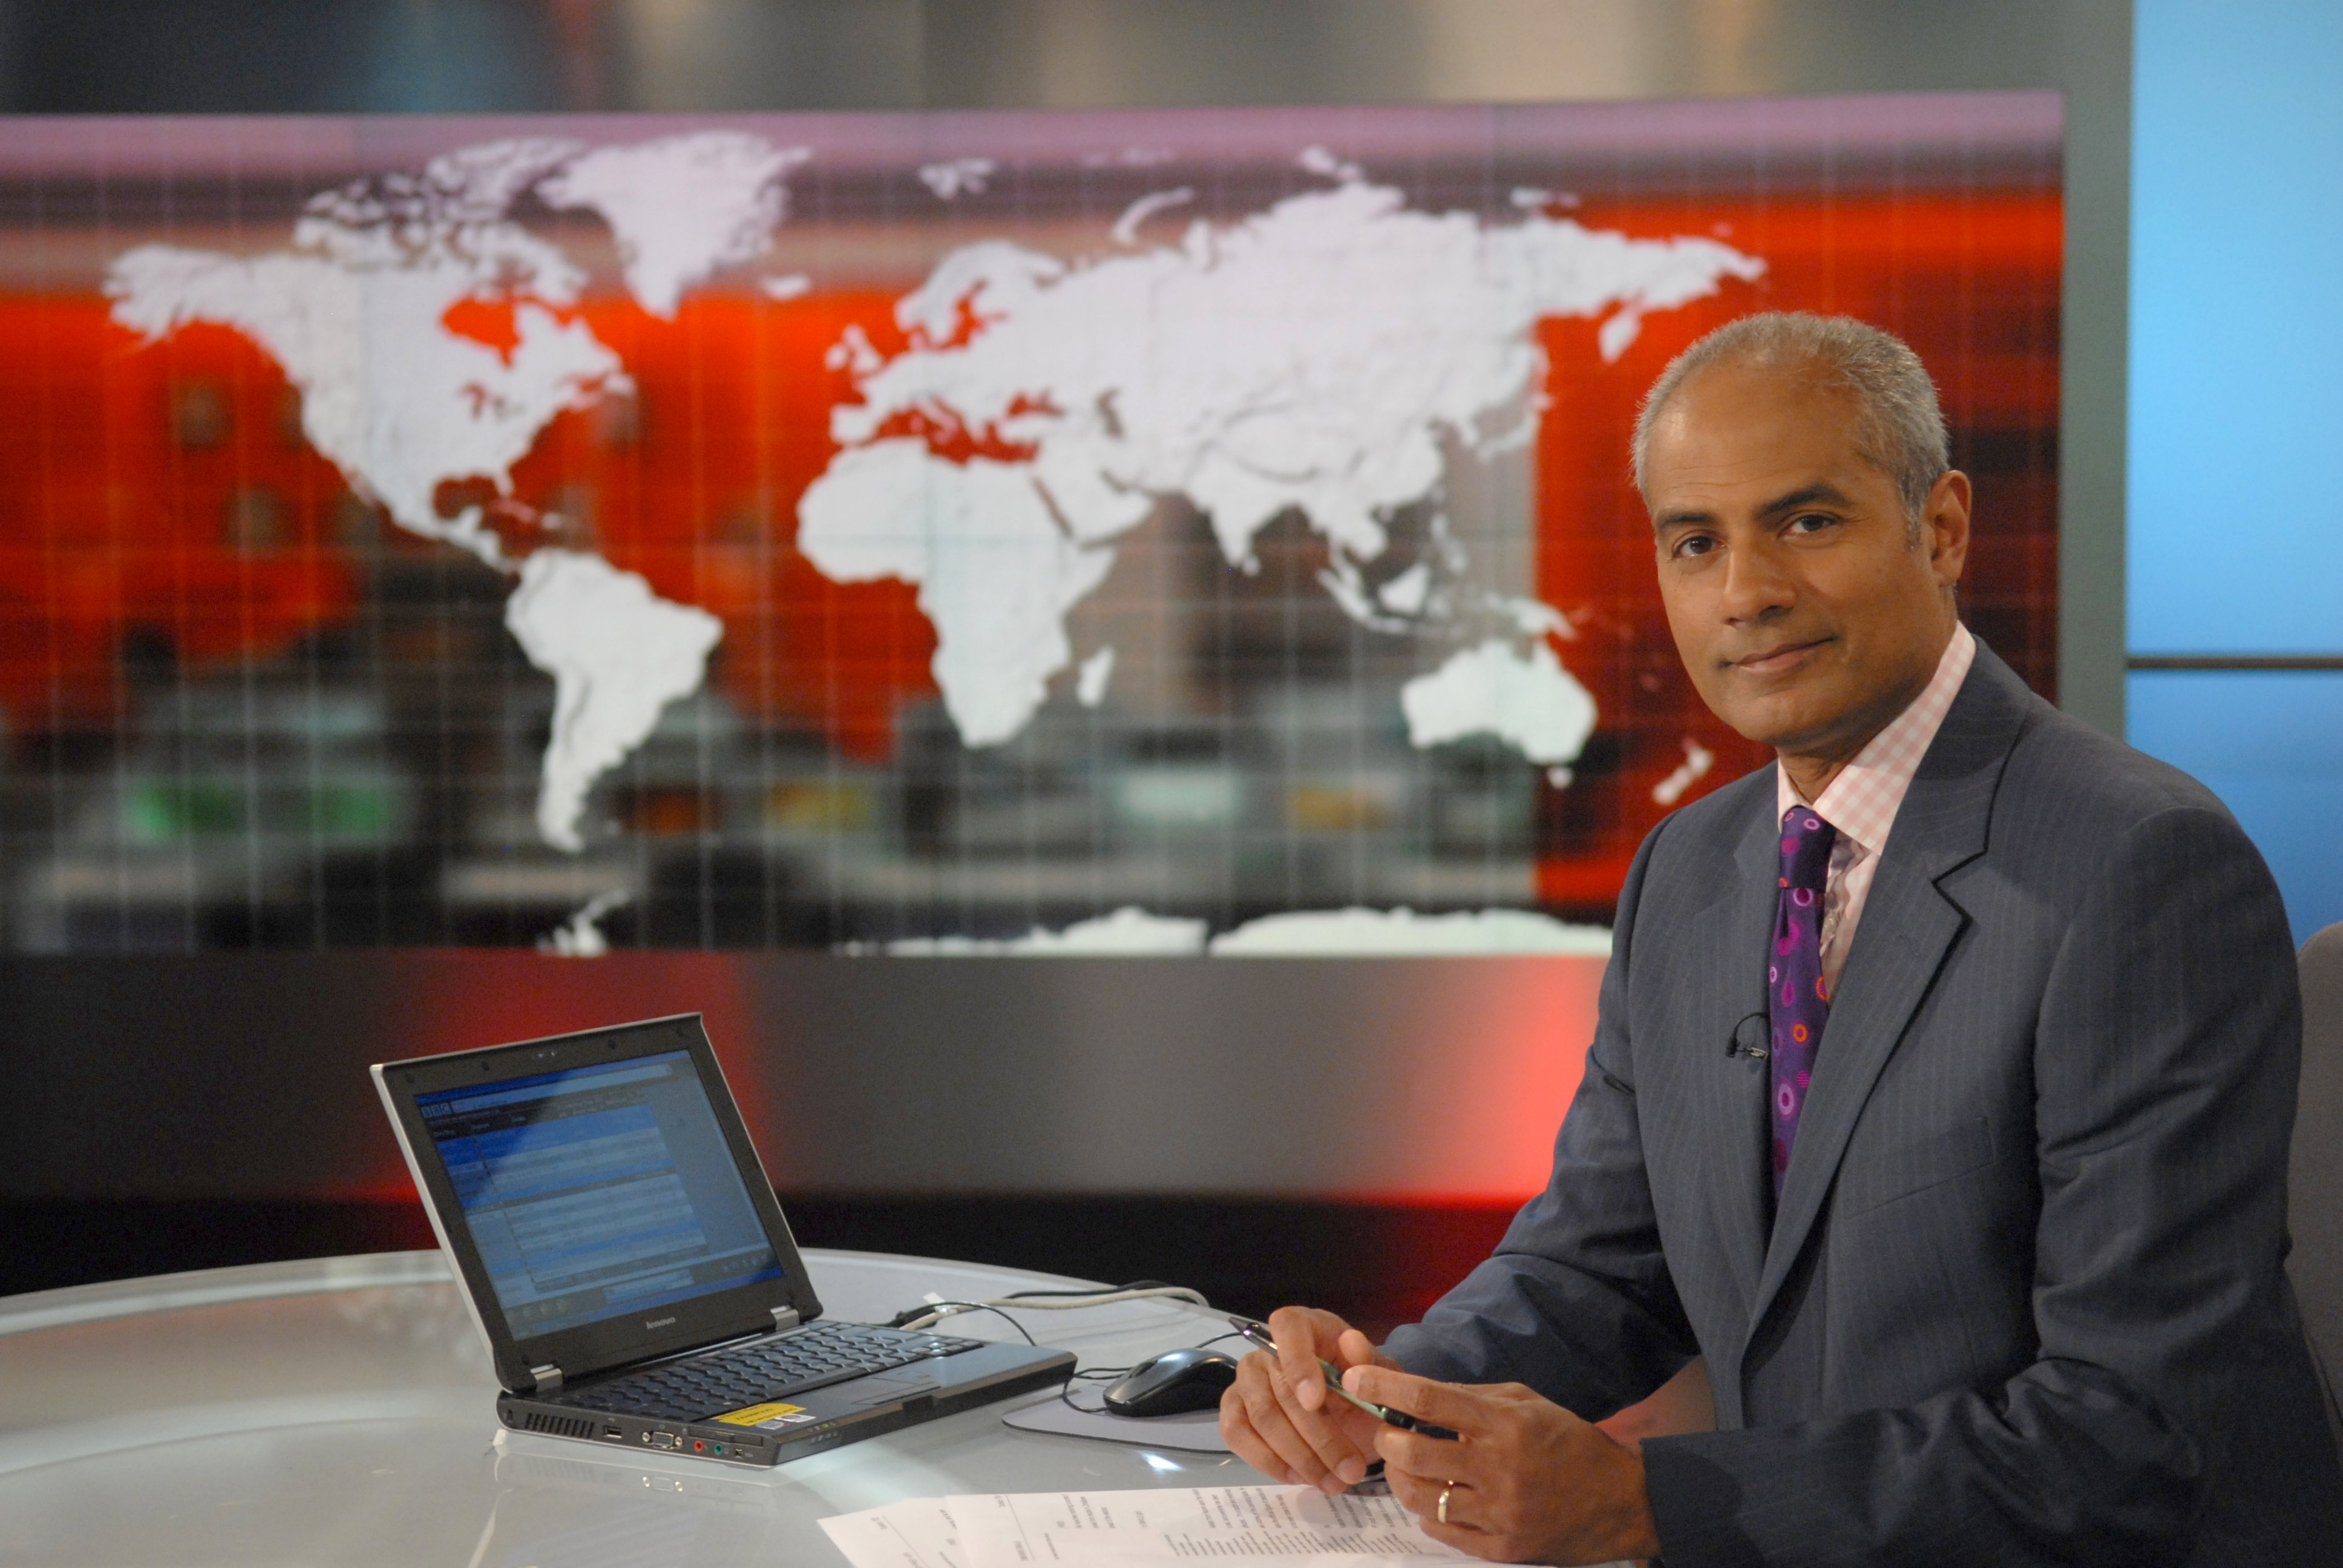 Presenter and newsreader George Alagiah was diagnosed with bowel cancer in 2014